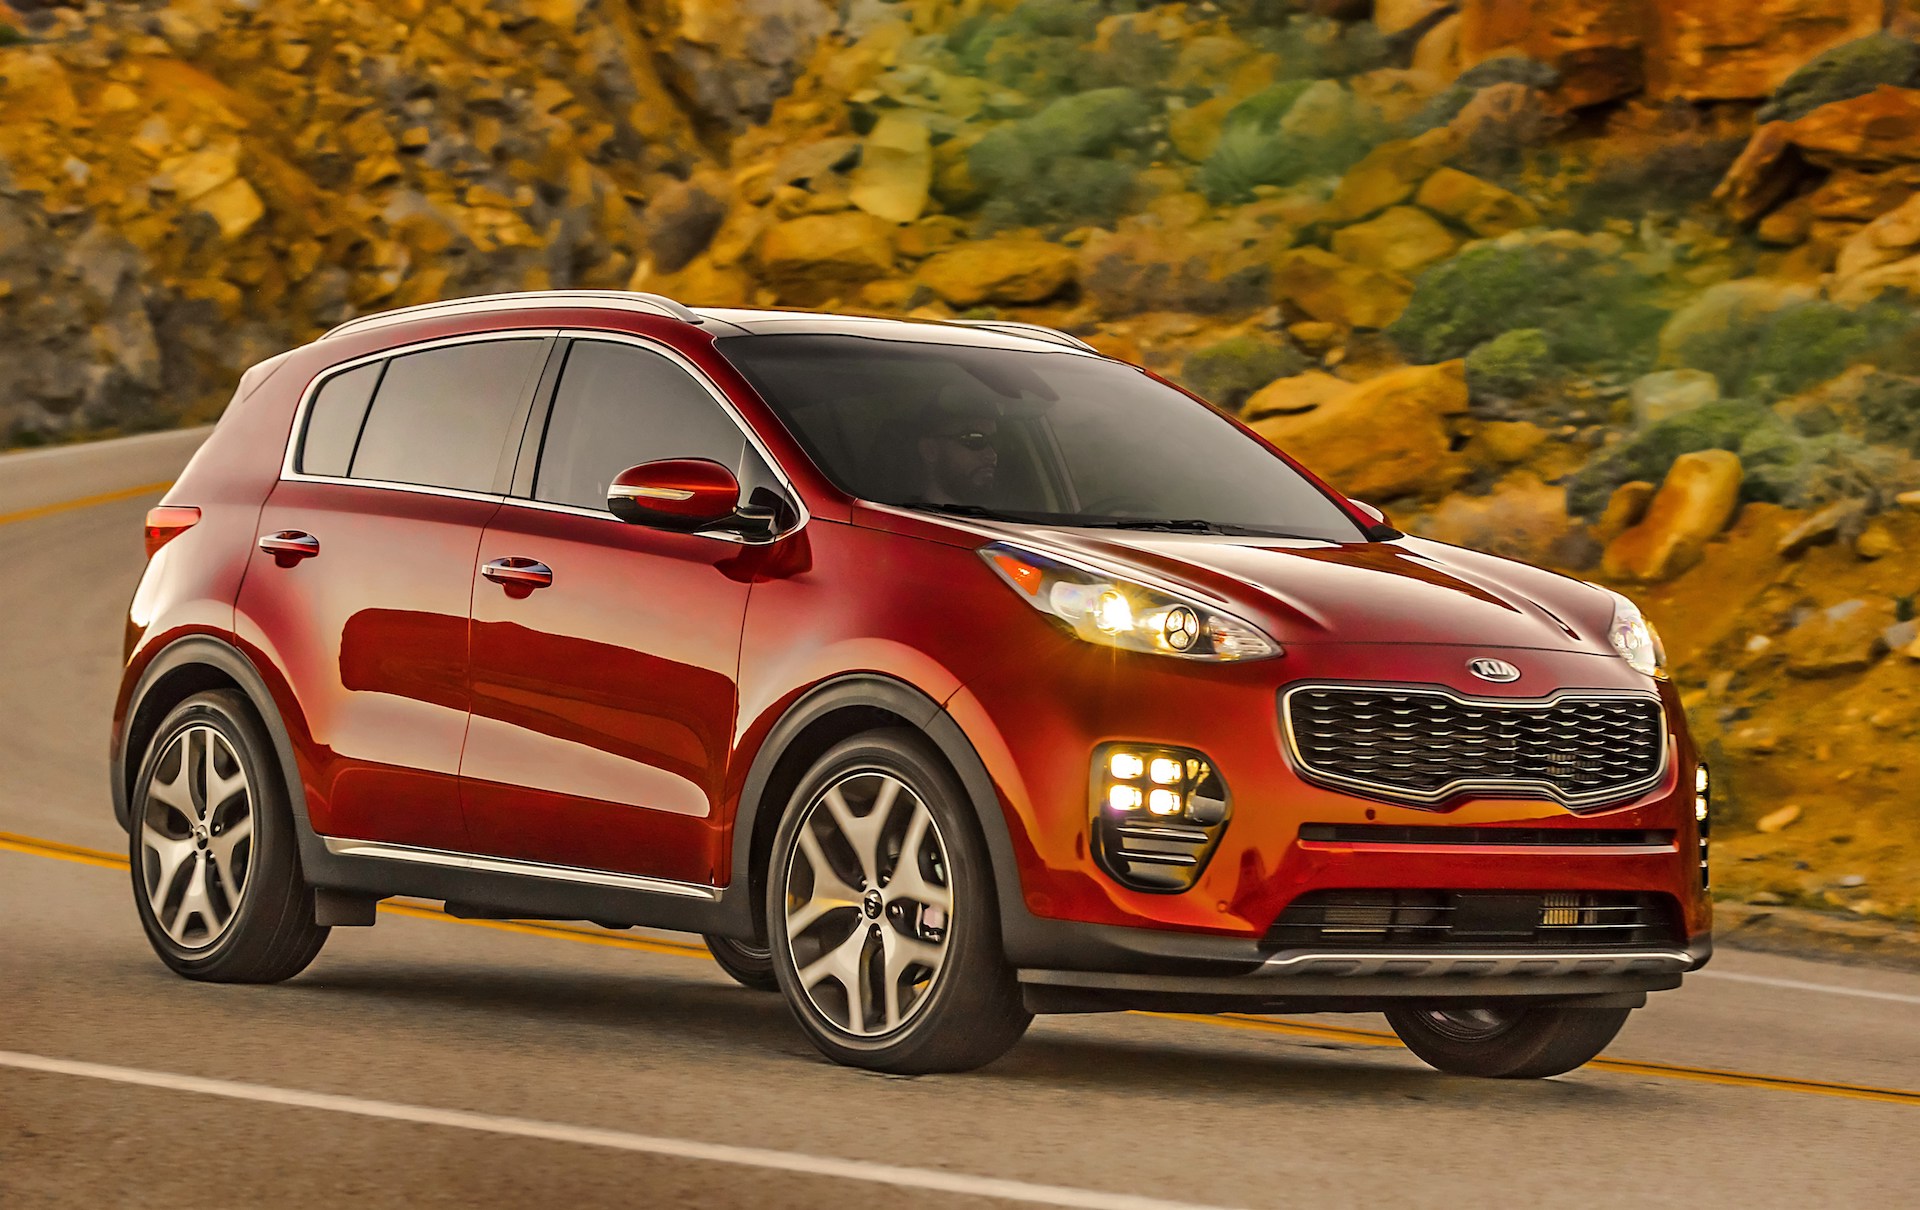 New and Used Kia Sportage Prices, Photos, Reviews, Specs The Car